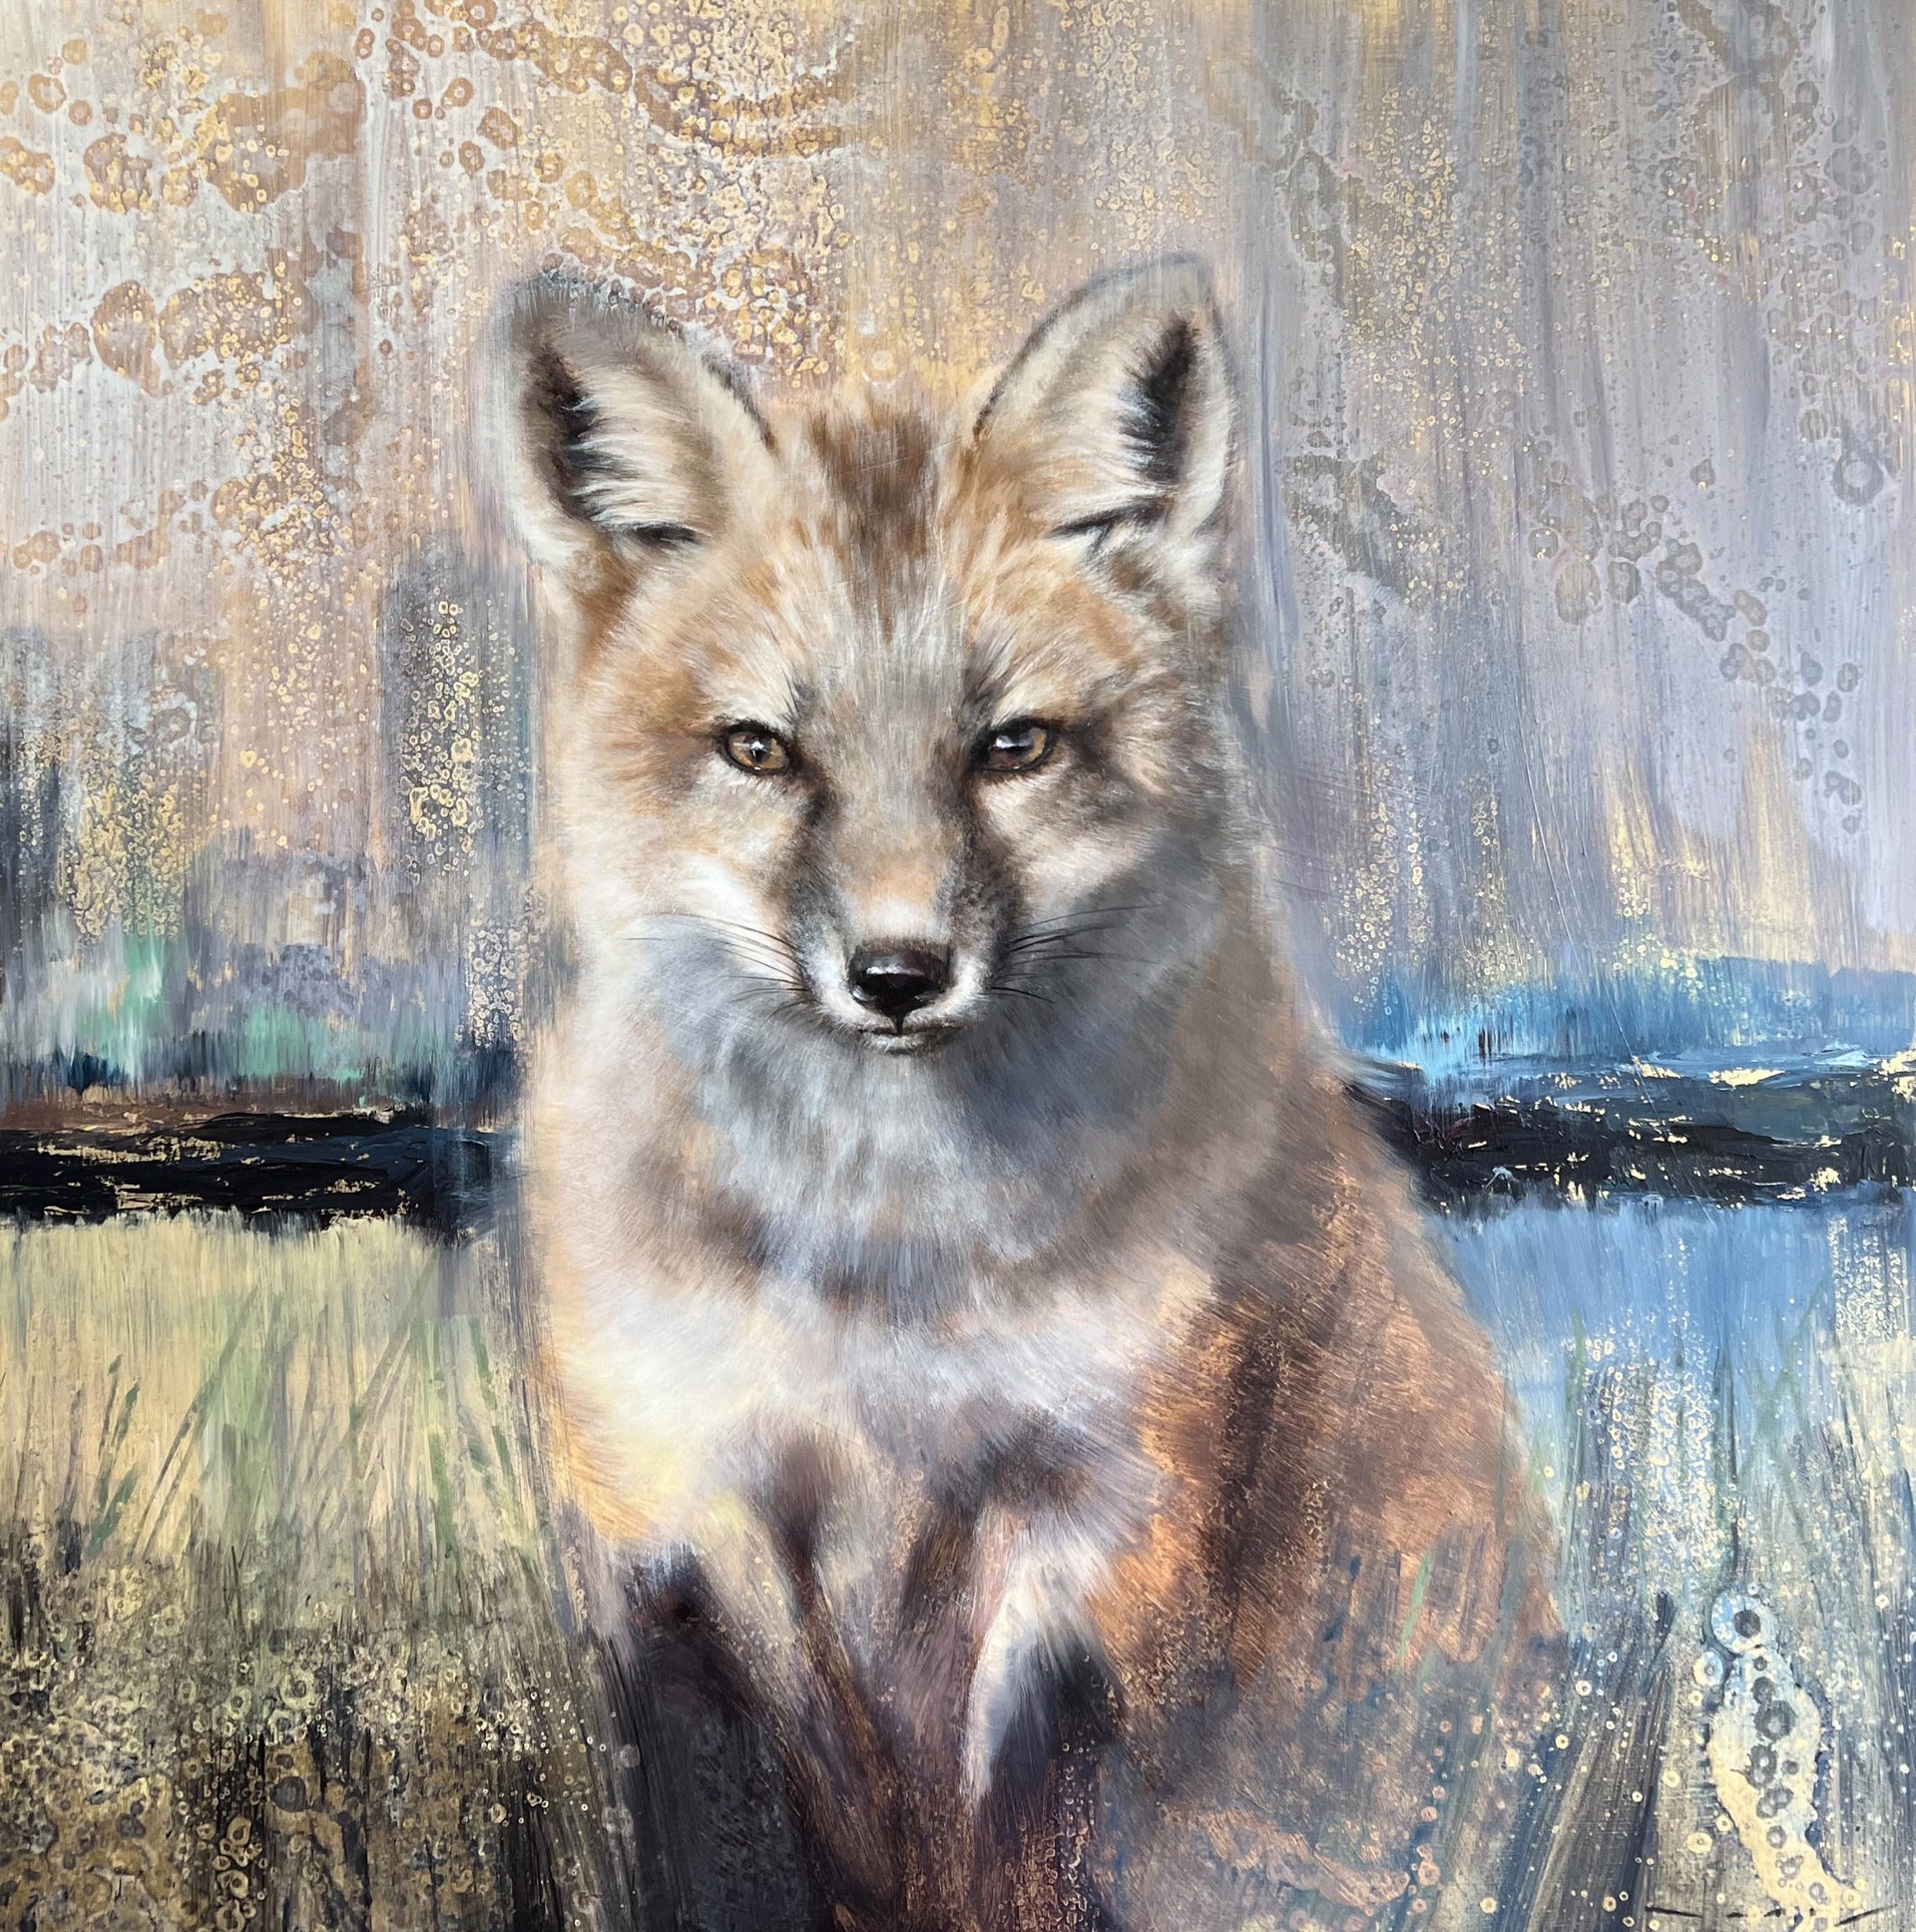 Original Mixed Media Painting By Nealy Riley Featuring A Fox Facing The Viewer Over Abstract Background